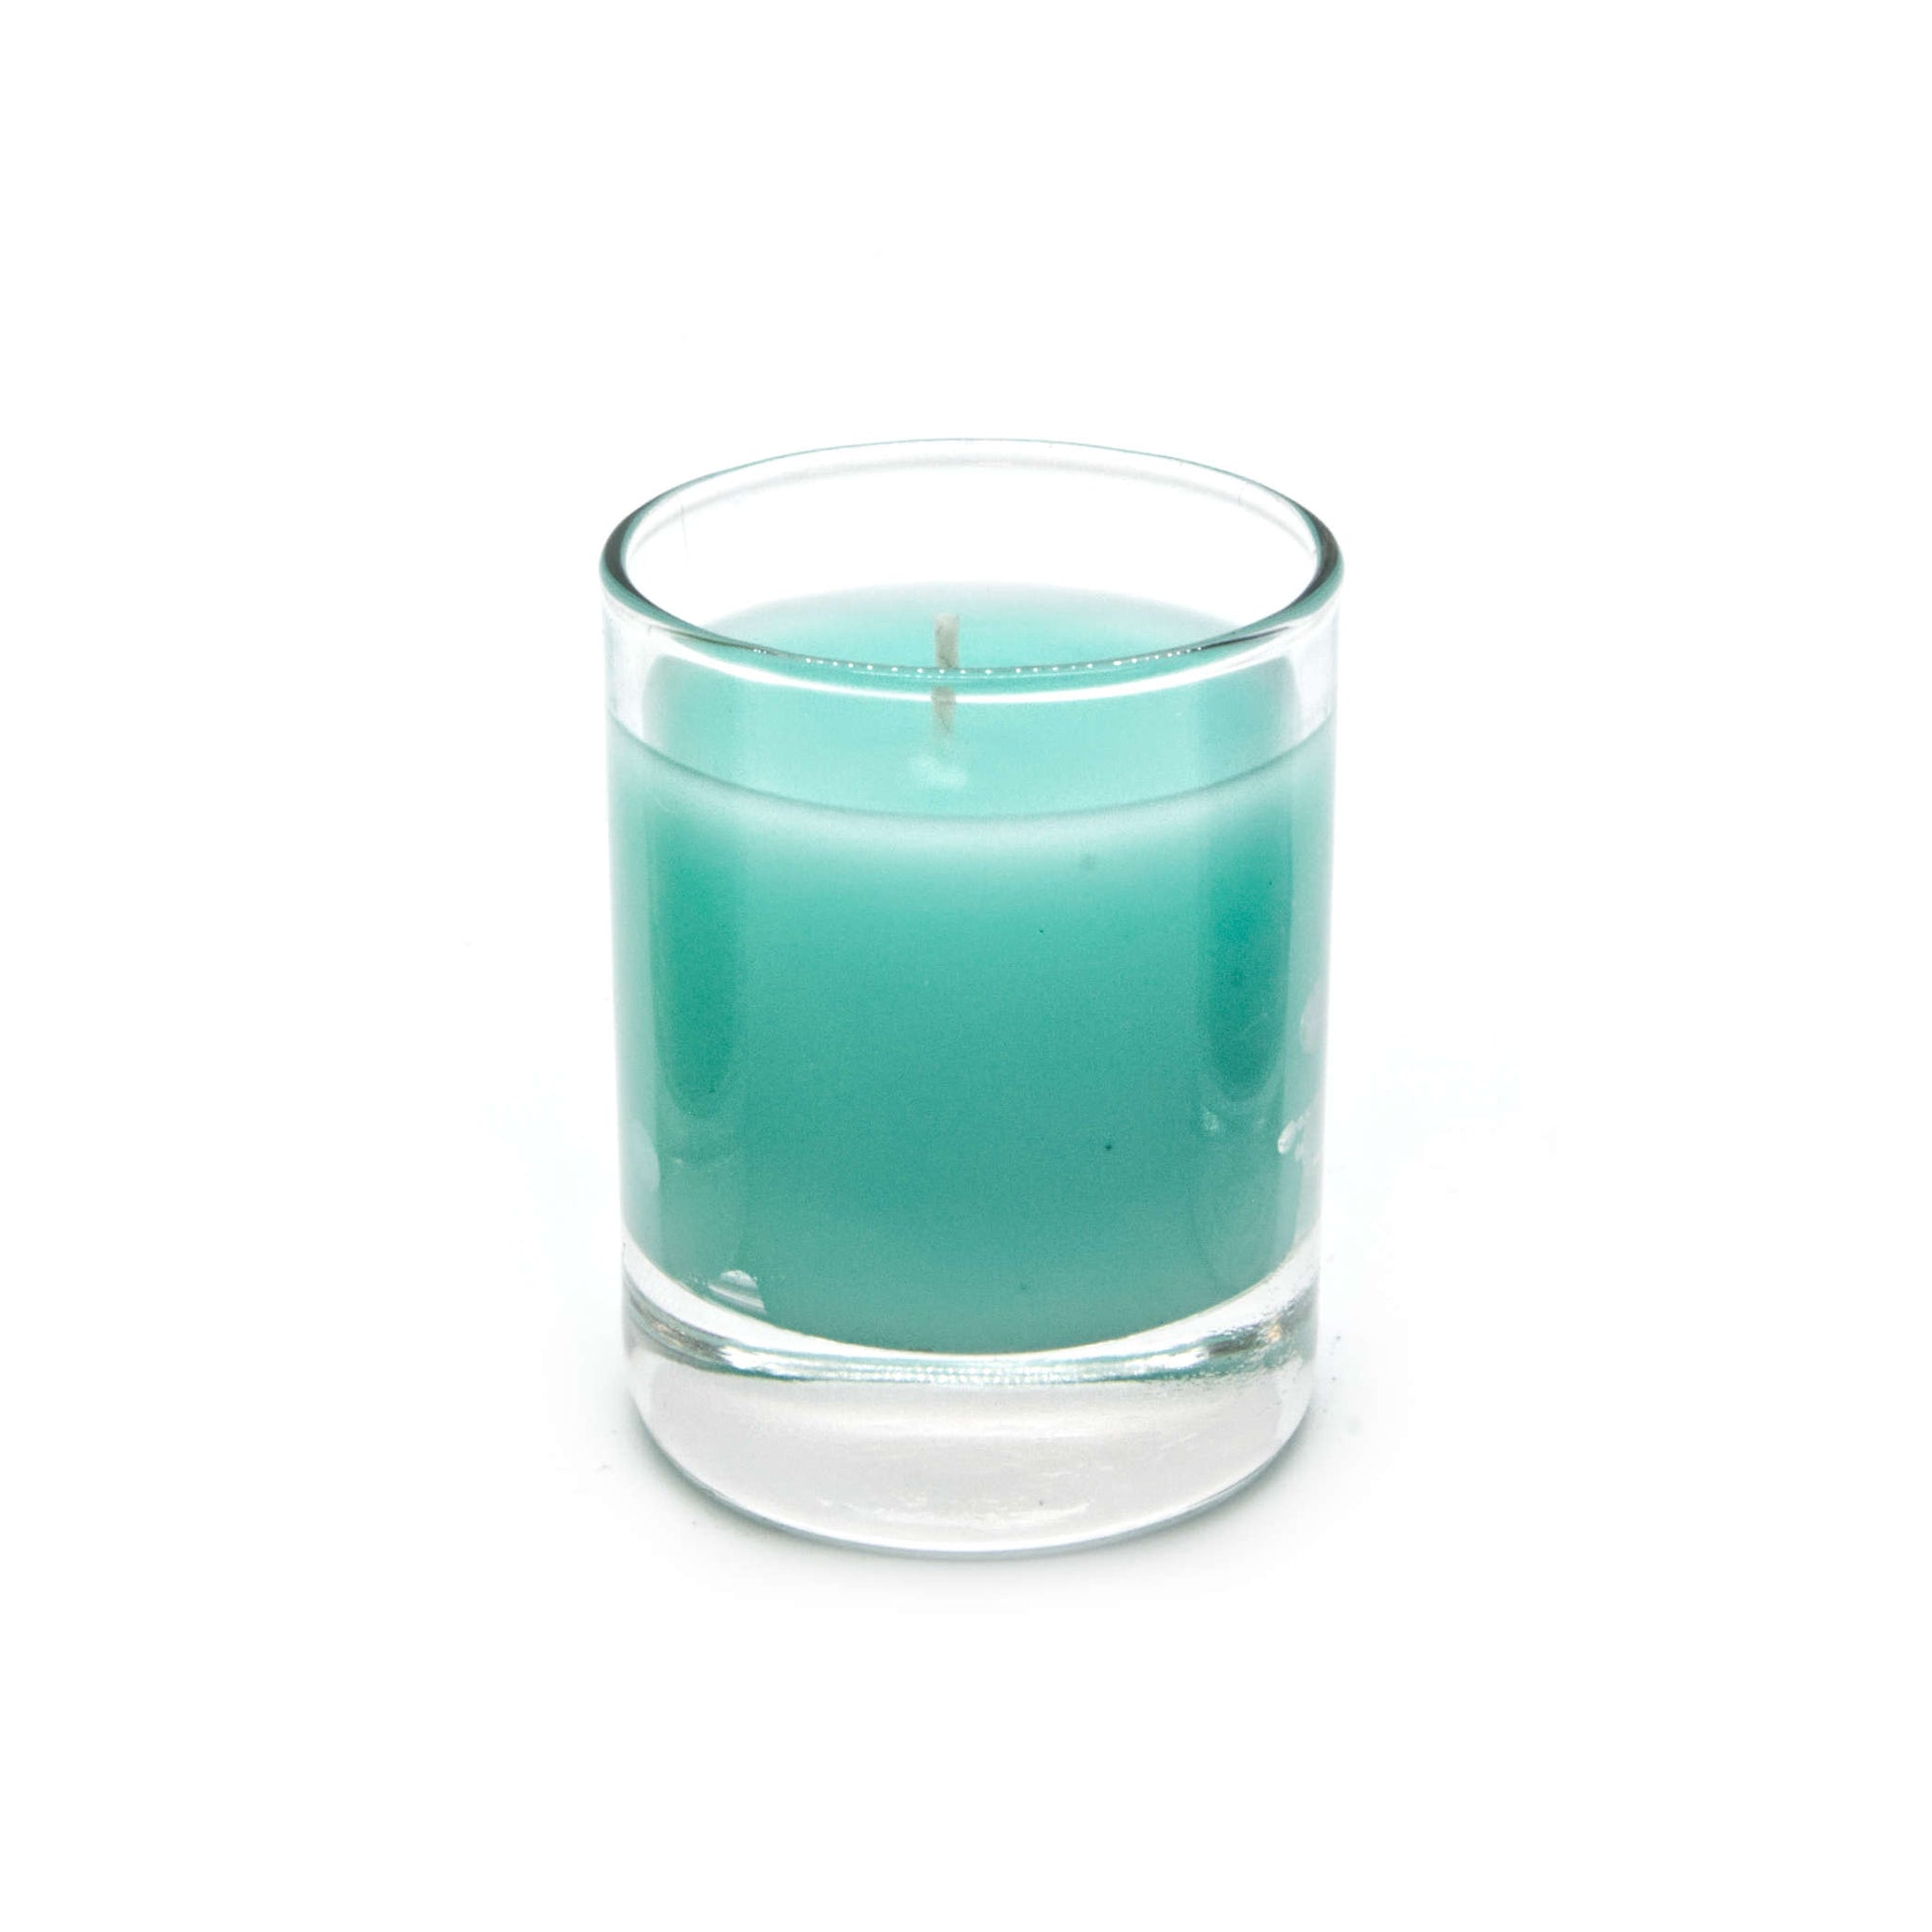 Turquoise & Caicos Votives Scented Candles 